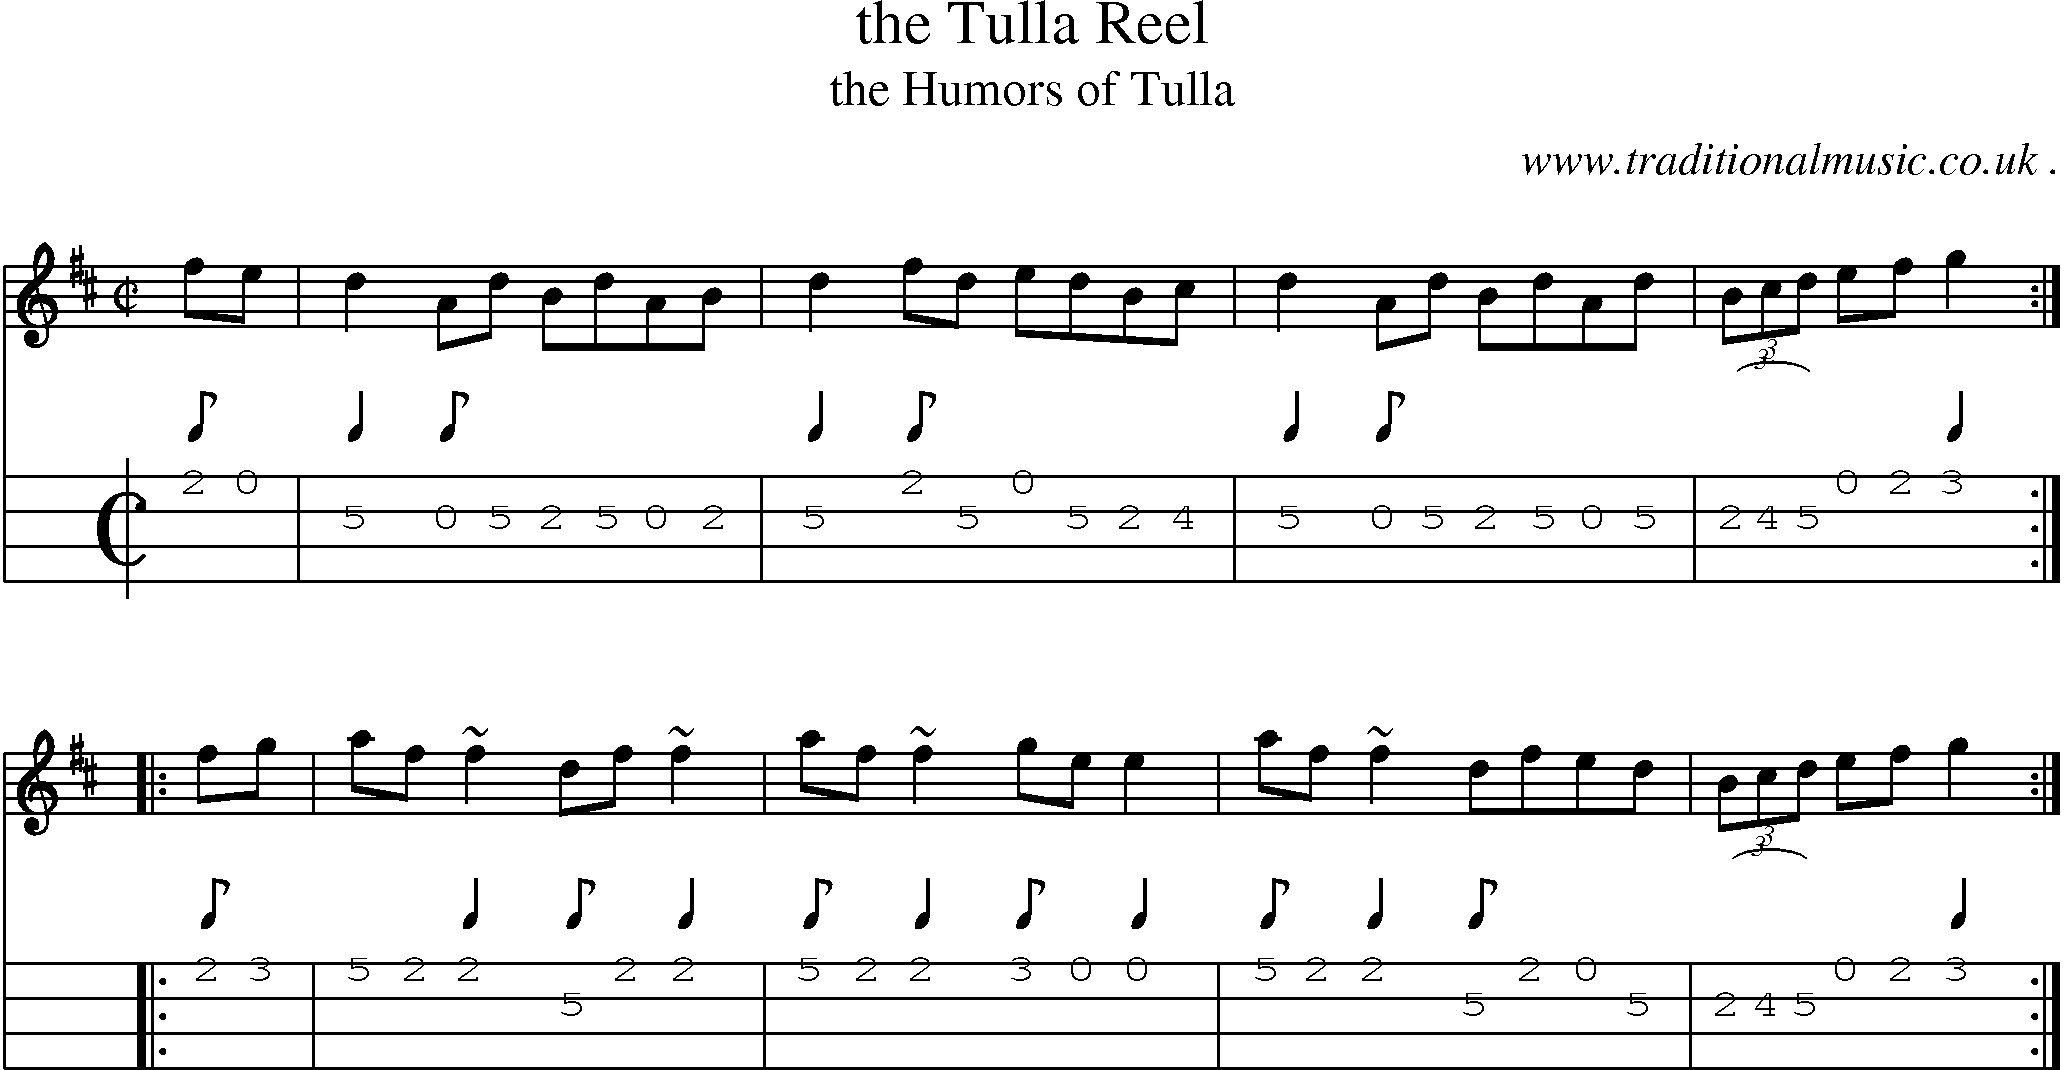 Sheet-music  score, Chords and Mandolin Tabs for The Tulla Reel